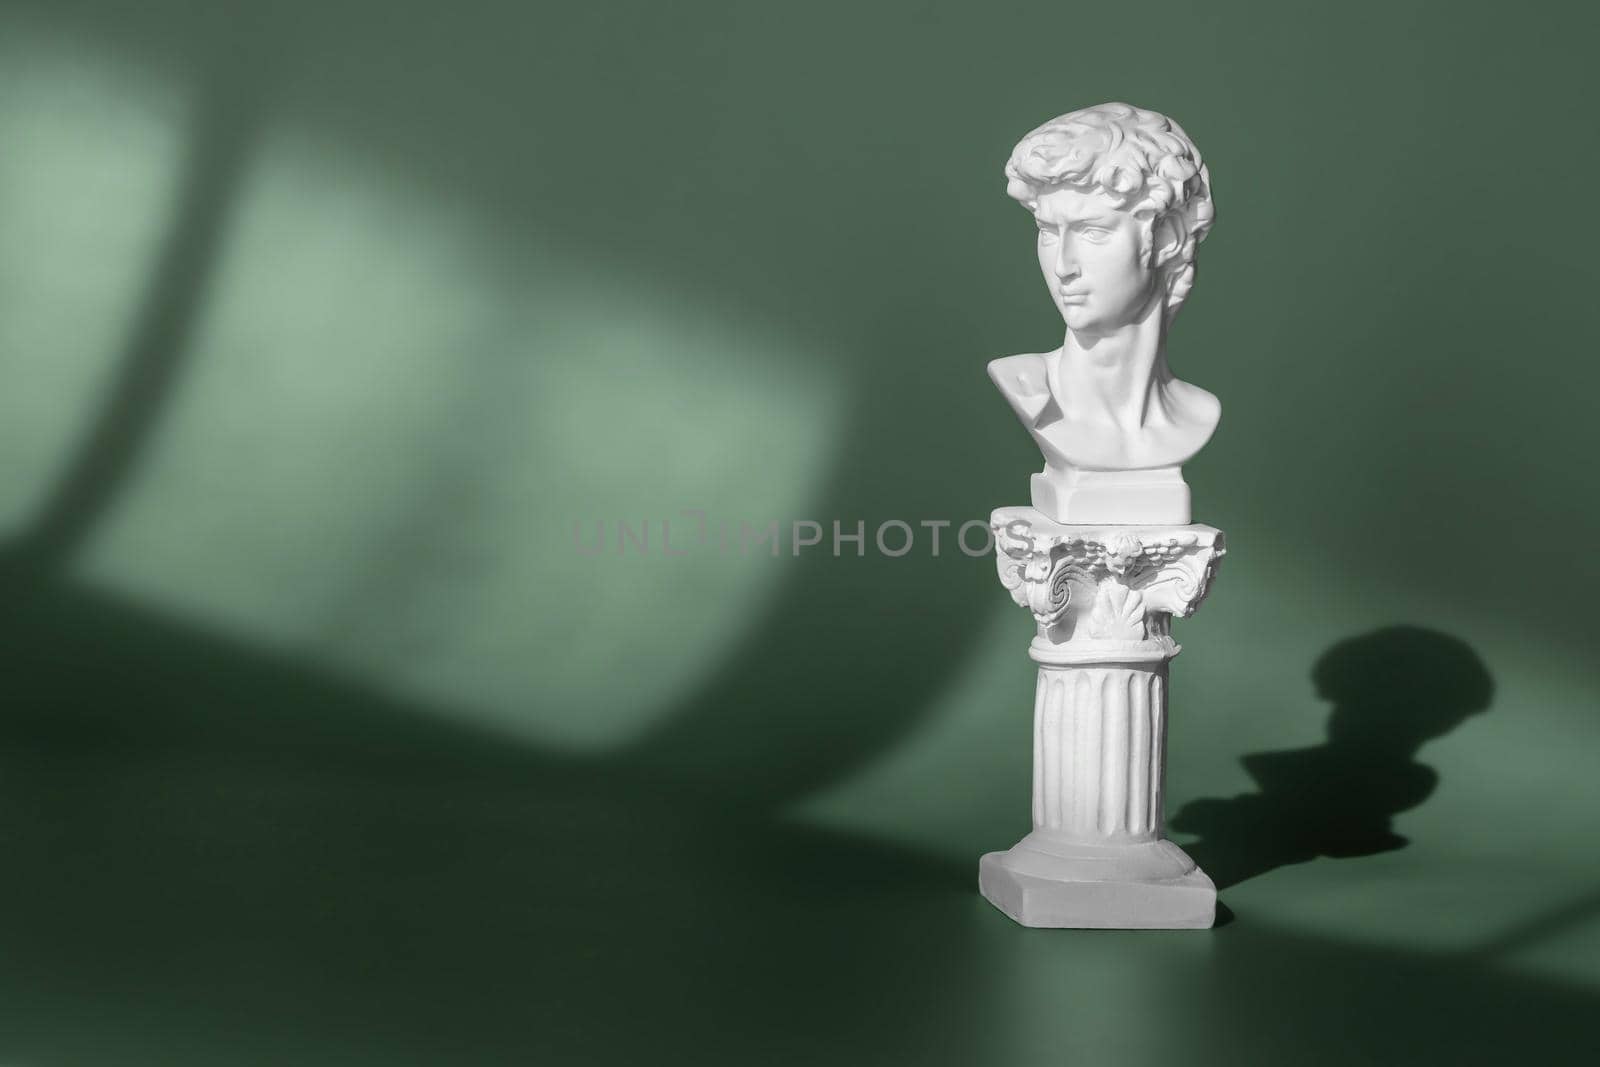 White marble head of young man, head of famous statue by Michelangelo - David from Florence. Gypsum copy of ancient statue head on green background with light and shadow